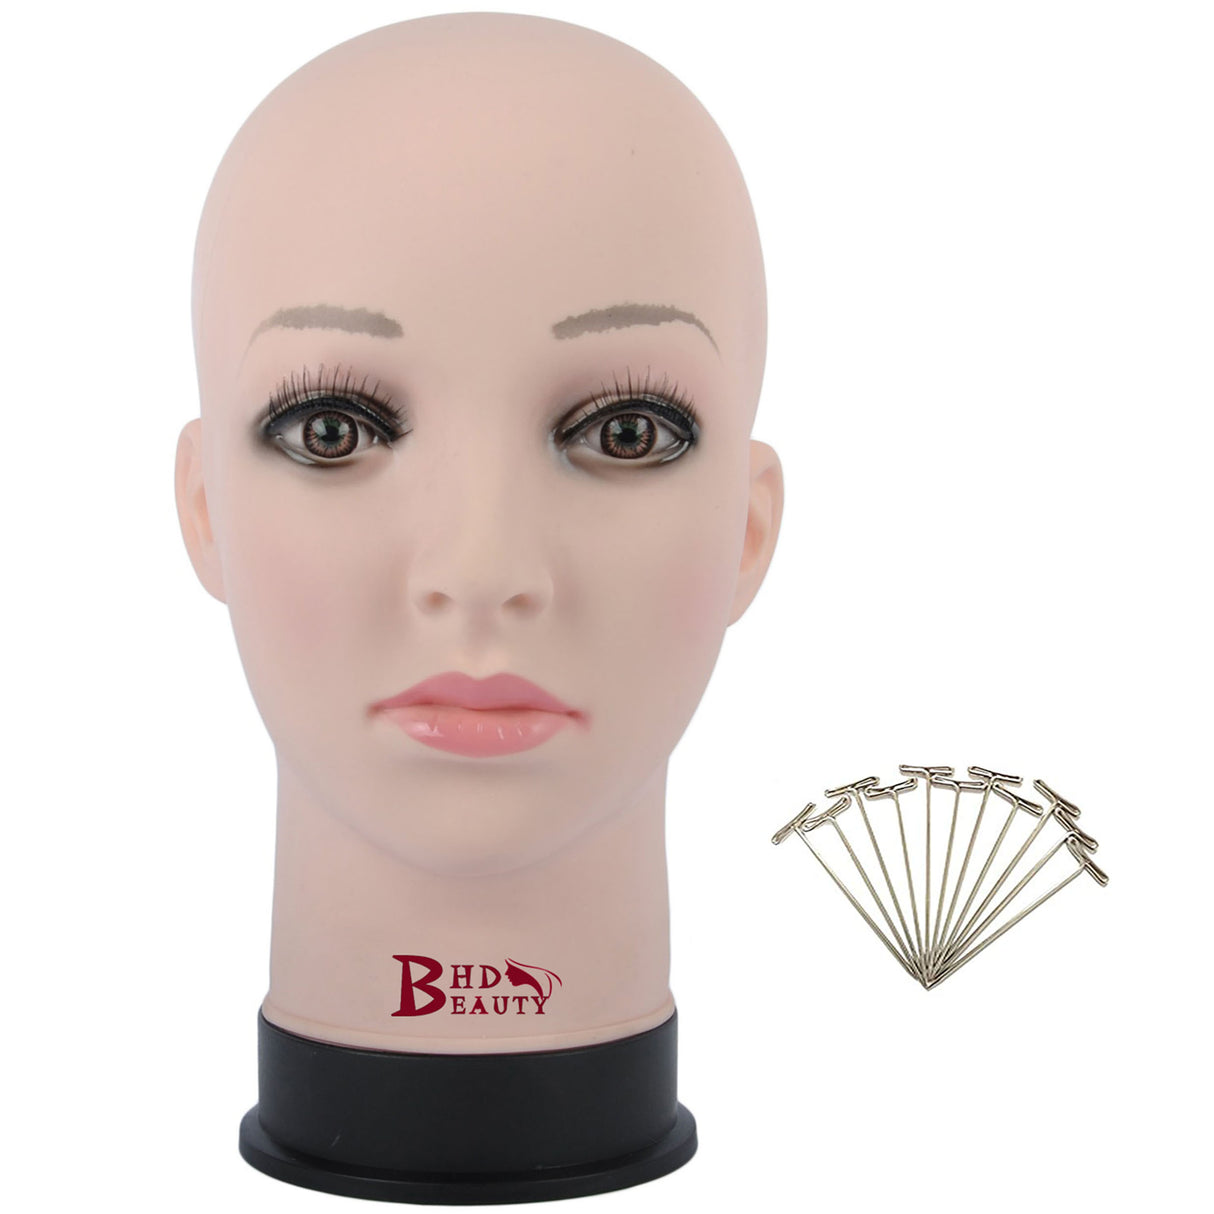 BHD BEAUTY Bald Realistic Mannequin Head with T-Pins for Wig Making and Display